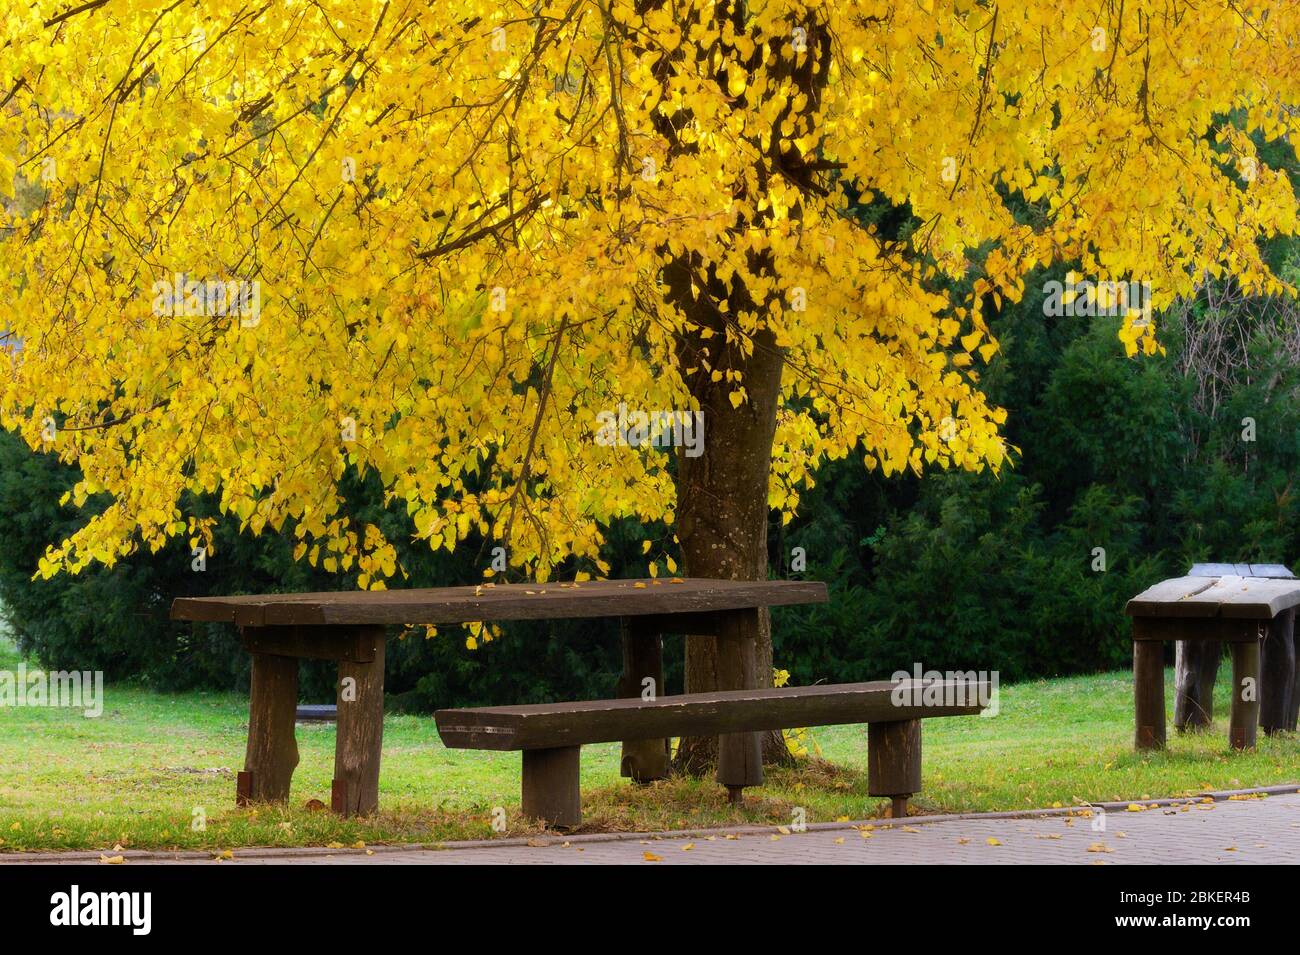 Wooden bench under small leaved lime tree in autumn colors. Smallleaved linden Tilia cordata in the park. Stock Photo